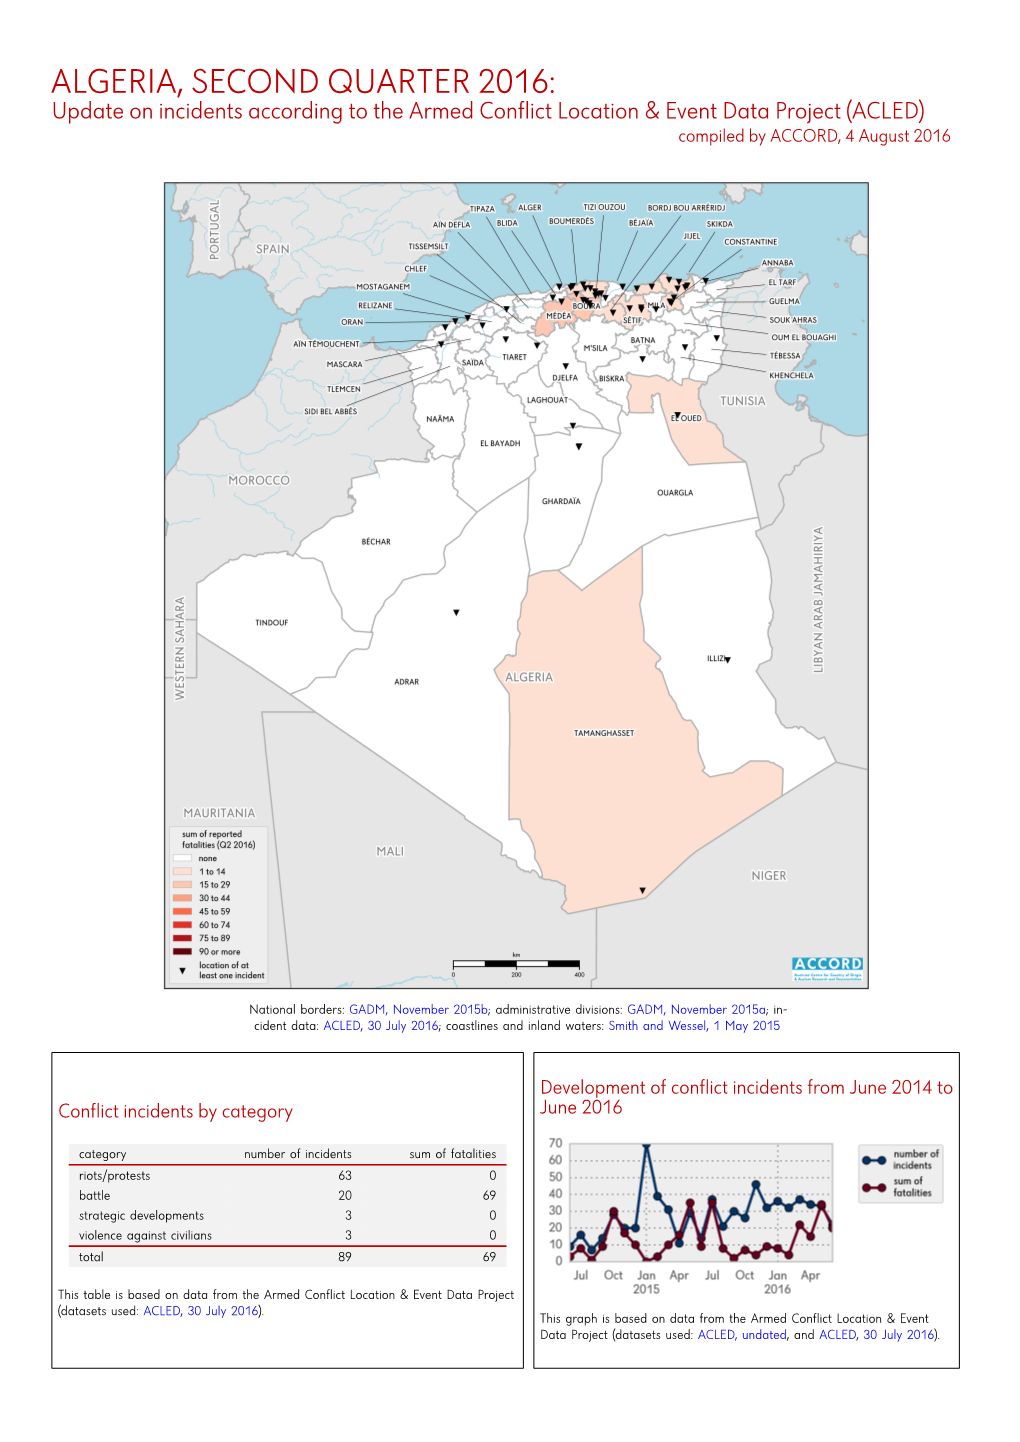 ALGERIA, SECOND QUARTER 2016: Update on Incidents According to the Armed Conflict Location & Event Data Project (ACLED) Compiled by ACCORD, 4 August 2016